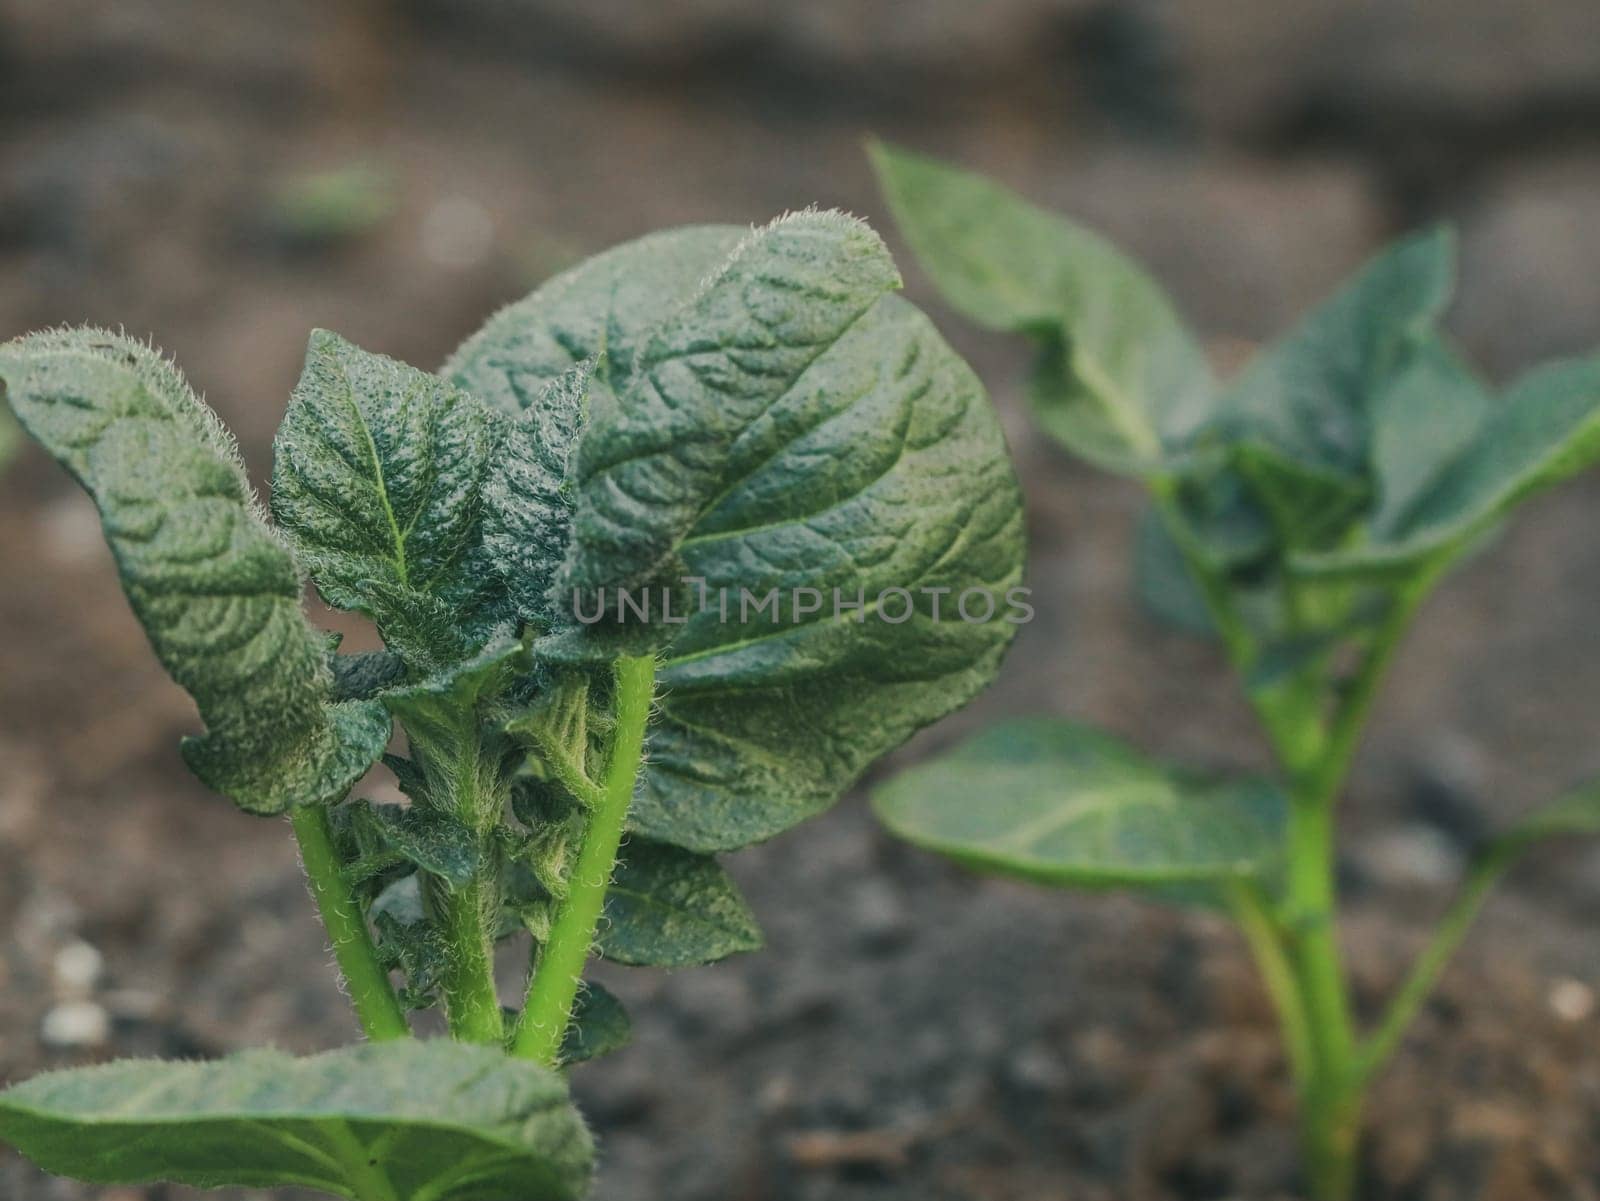 Beautiful view of young juicy and green potato tops, close-up side view with depth of field.